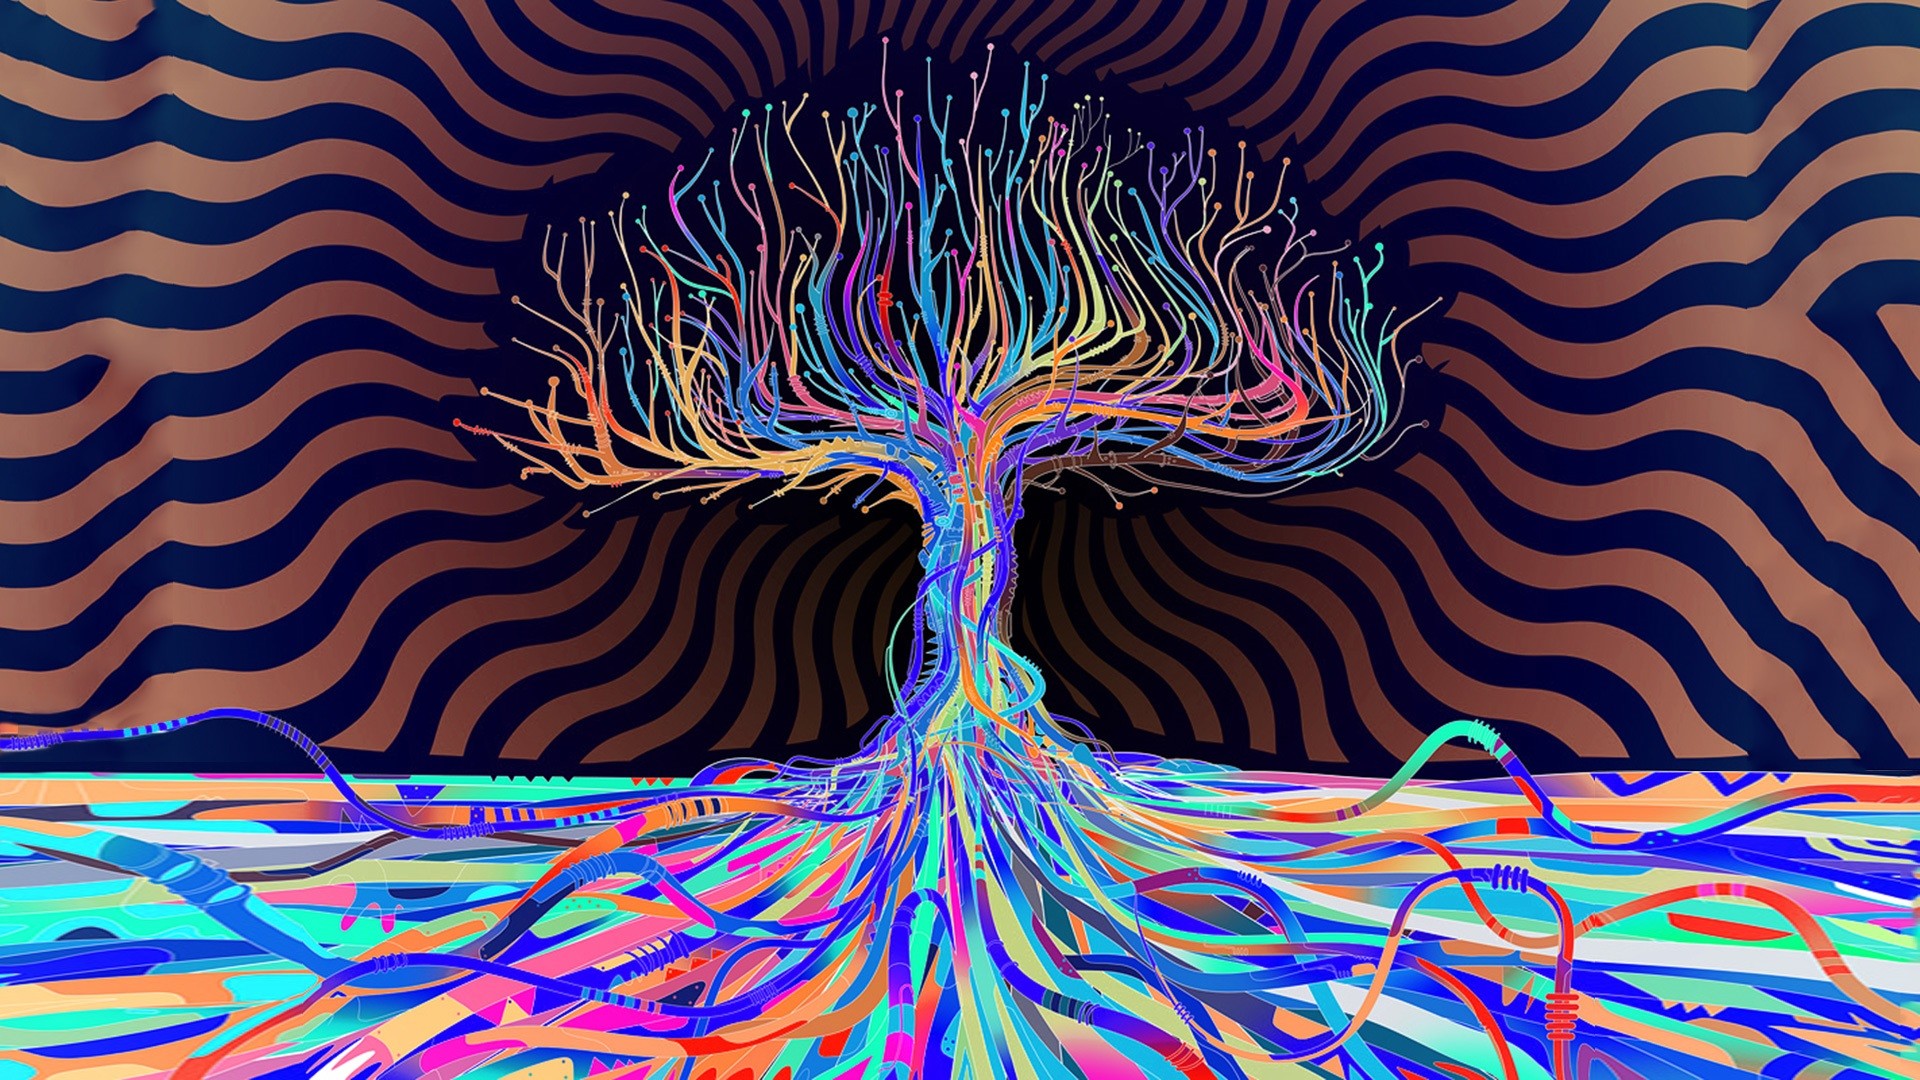 Psychedelic HD Wallpapers Wallpaper HD Wallpapers Pinterest Psychedelic, Hd wallpaper and Wallpaper